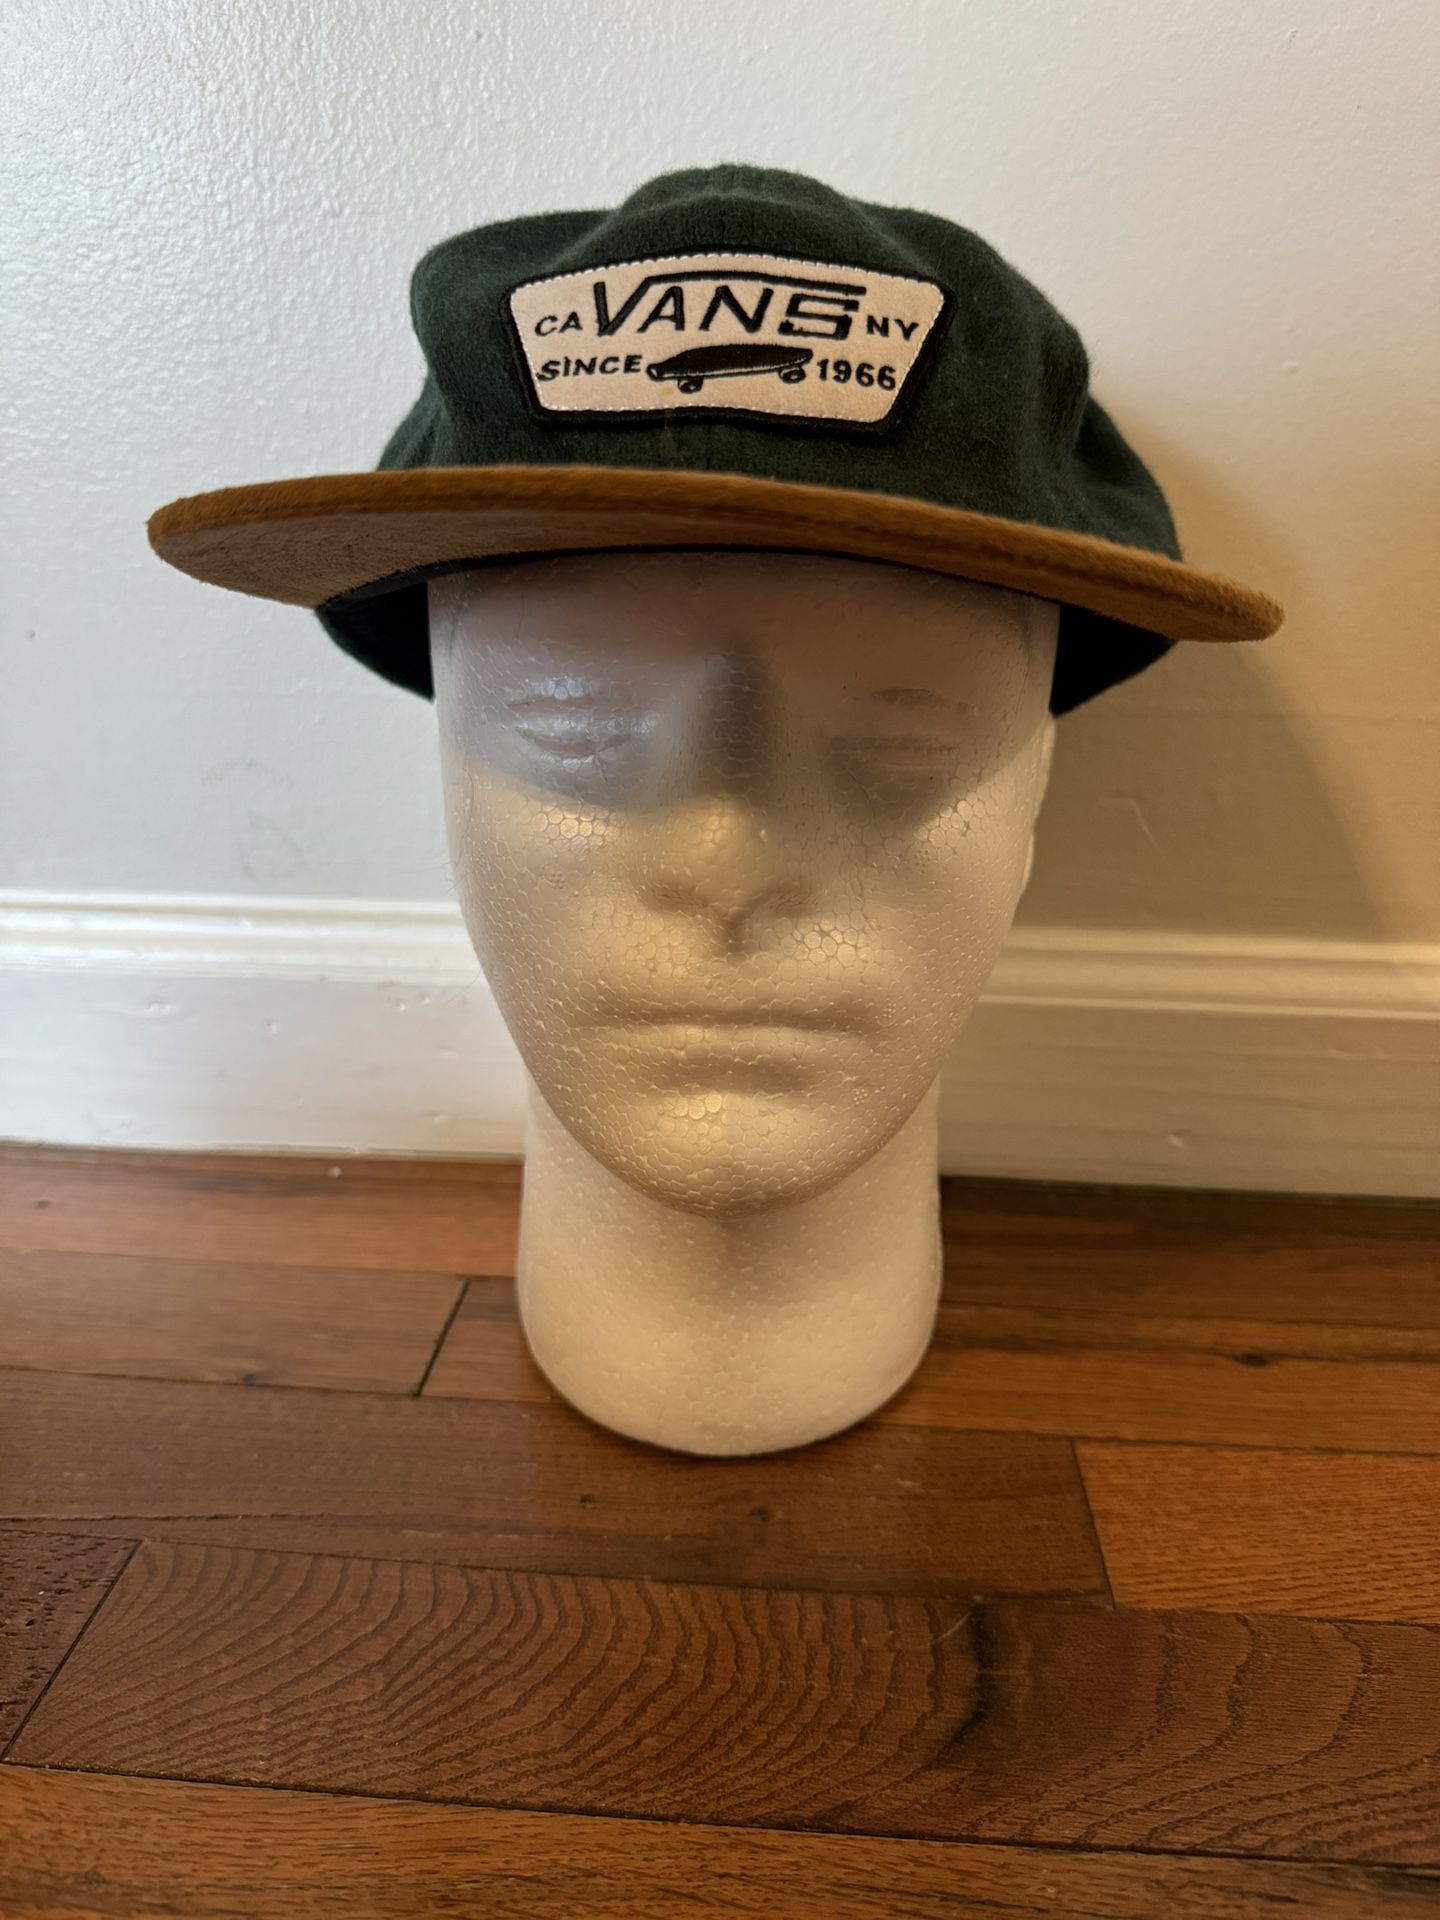 Green Vans Baseball Hat Tweed / Suede CA NY Since '66 Brown Leather Strapback